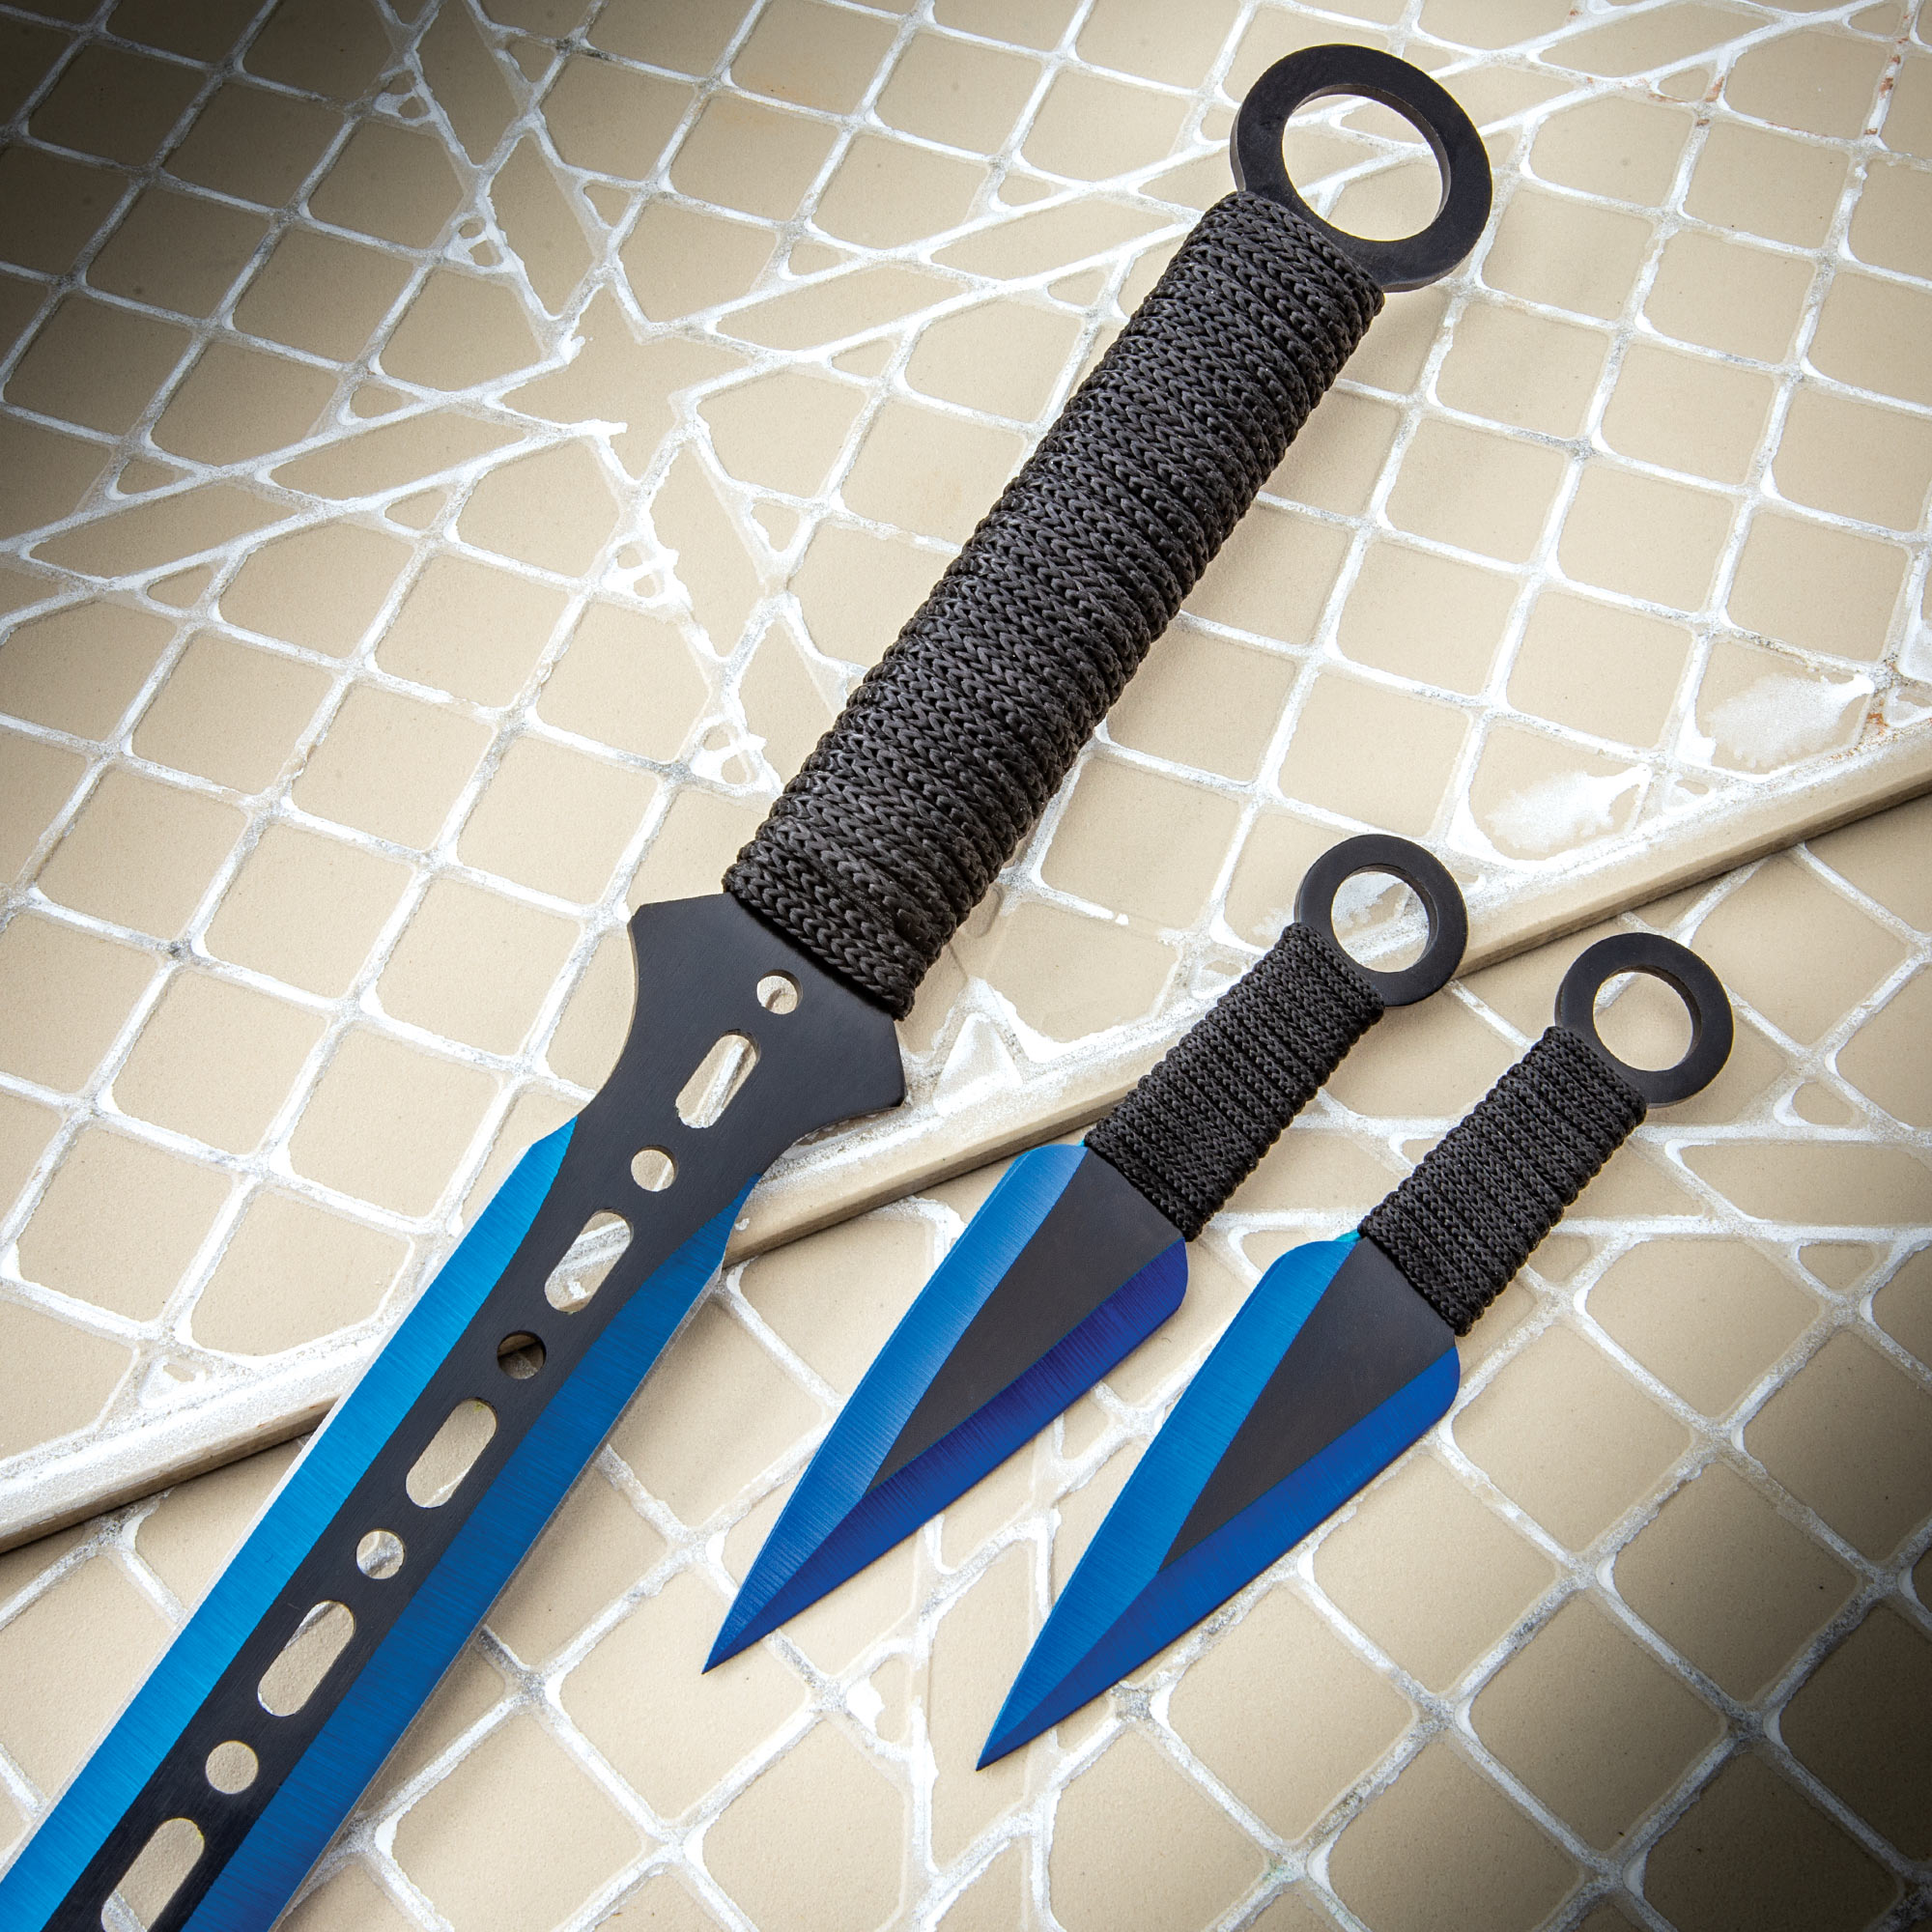 Blue Two-Tone Sword and Throwing Knives Set | BUDK.com - Knives ...